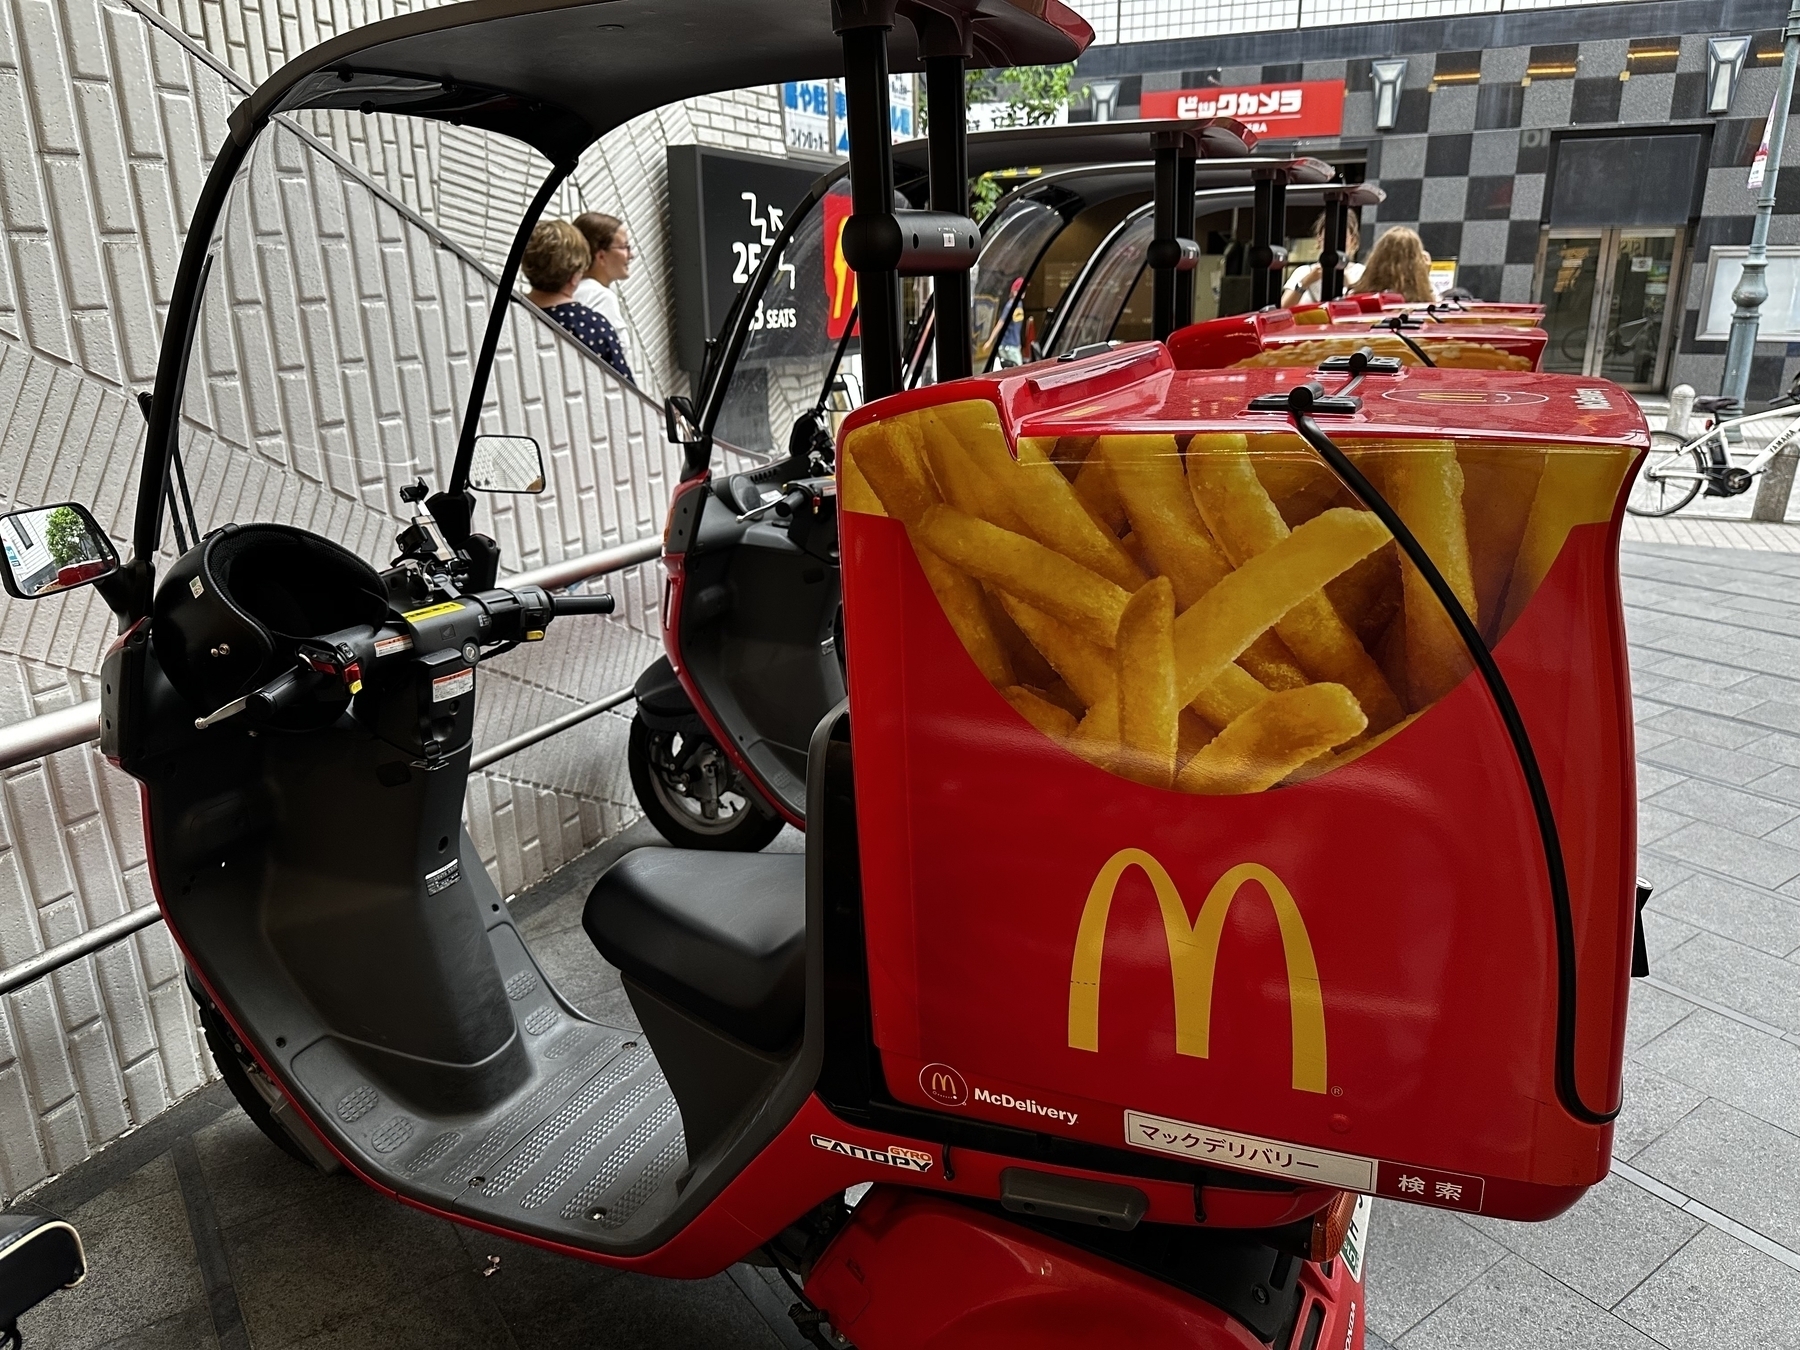 McDonald’s delivery